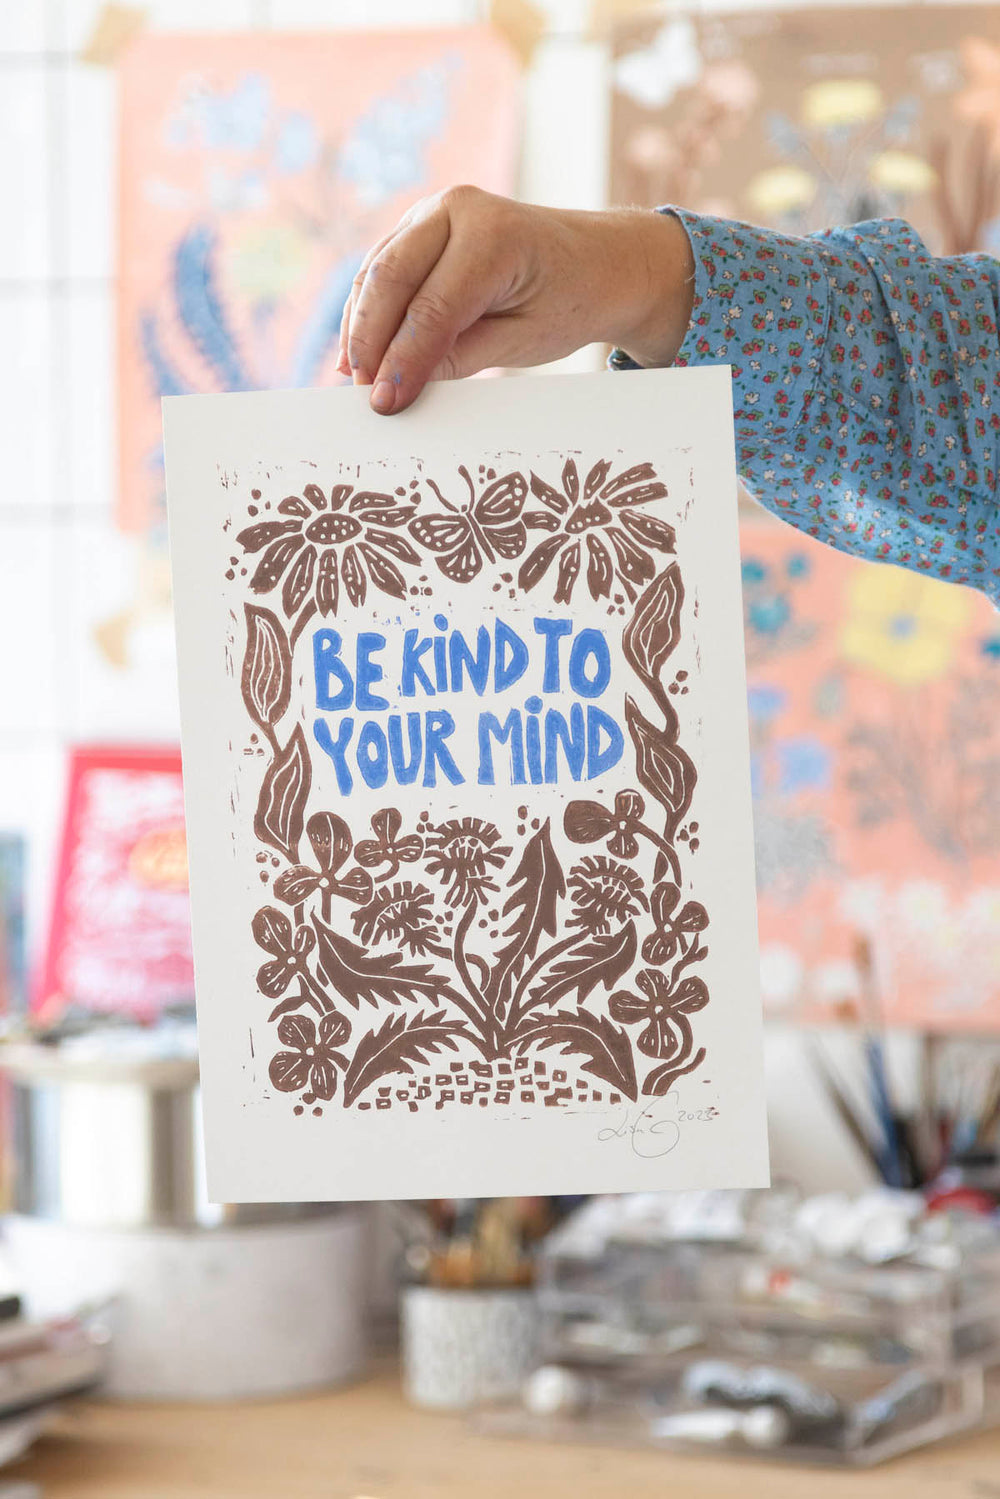 Be kind to your mind / Handmade Linoleum print / A4 size / 1.st edition.